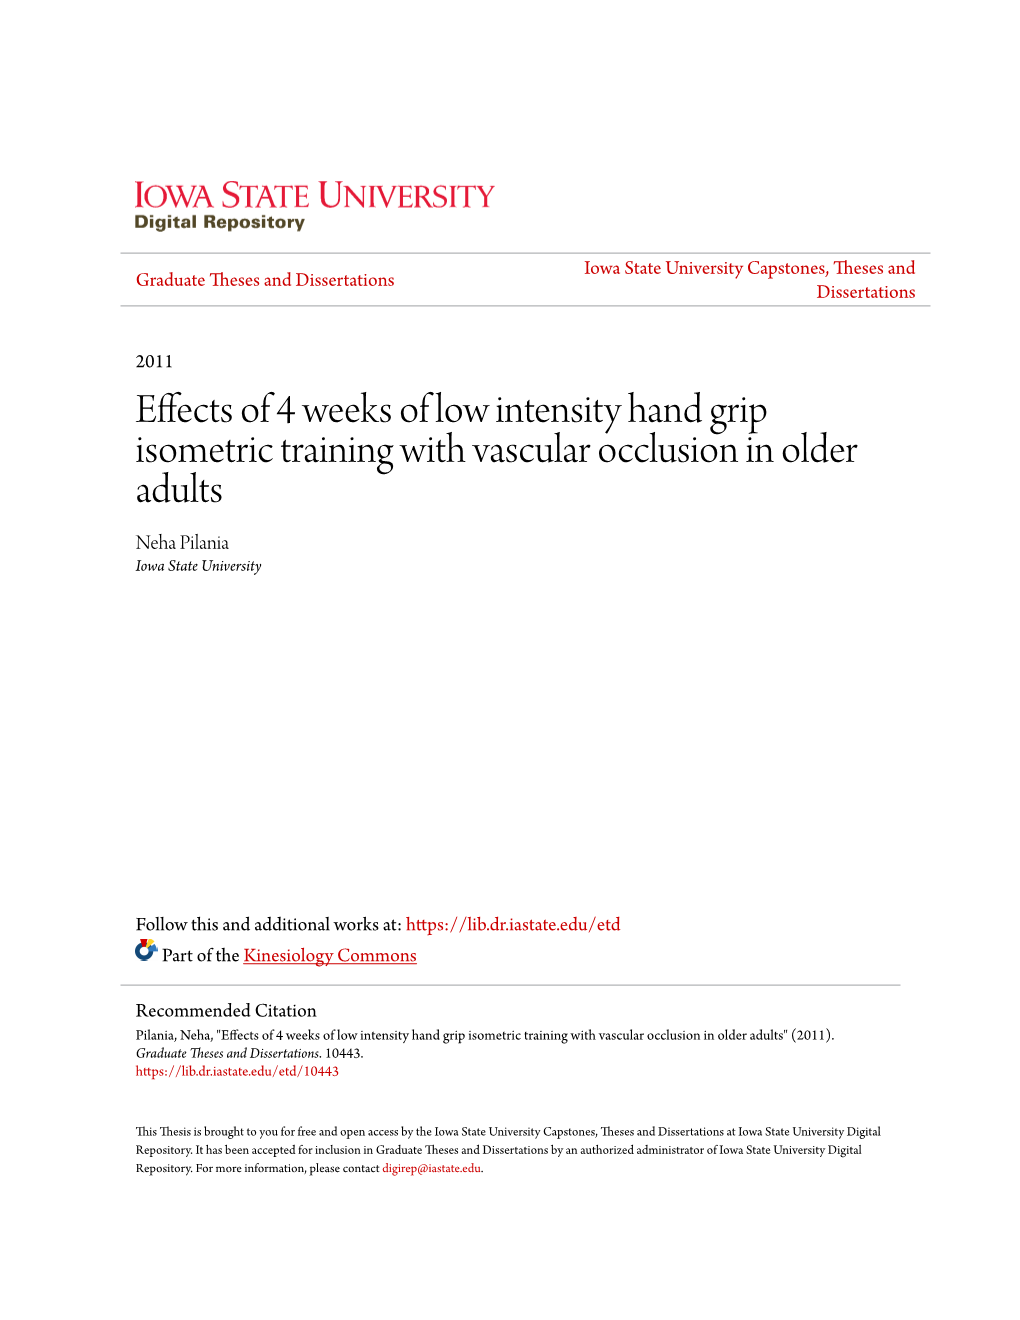 Effects of 4 Weeks of Low Intensity Hand Grip Isometric Training with Vascular Occlusion in Older Adults Neha Pilania Iowa State University